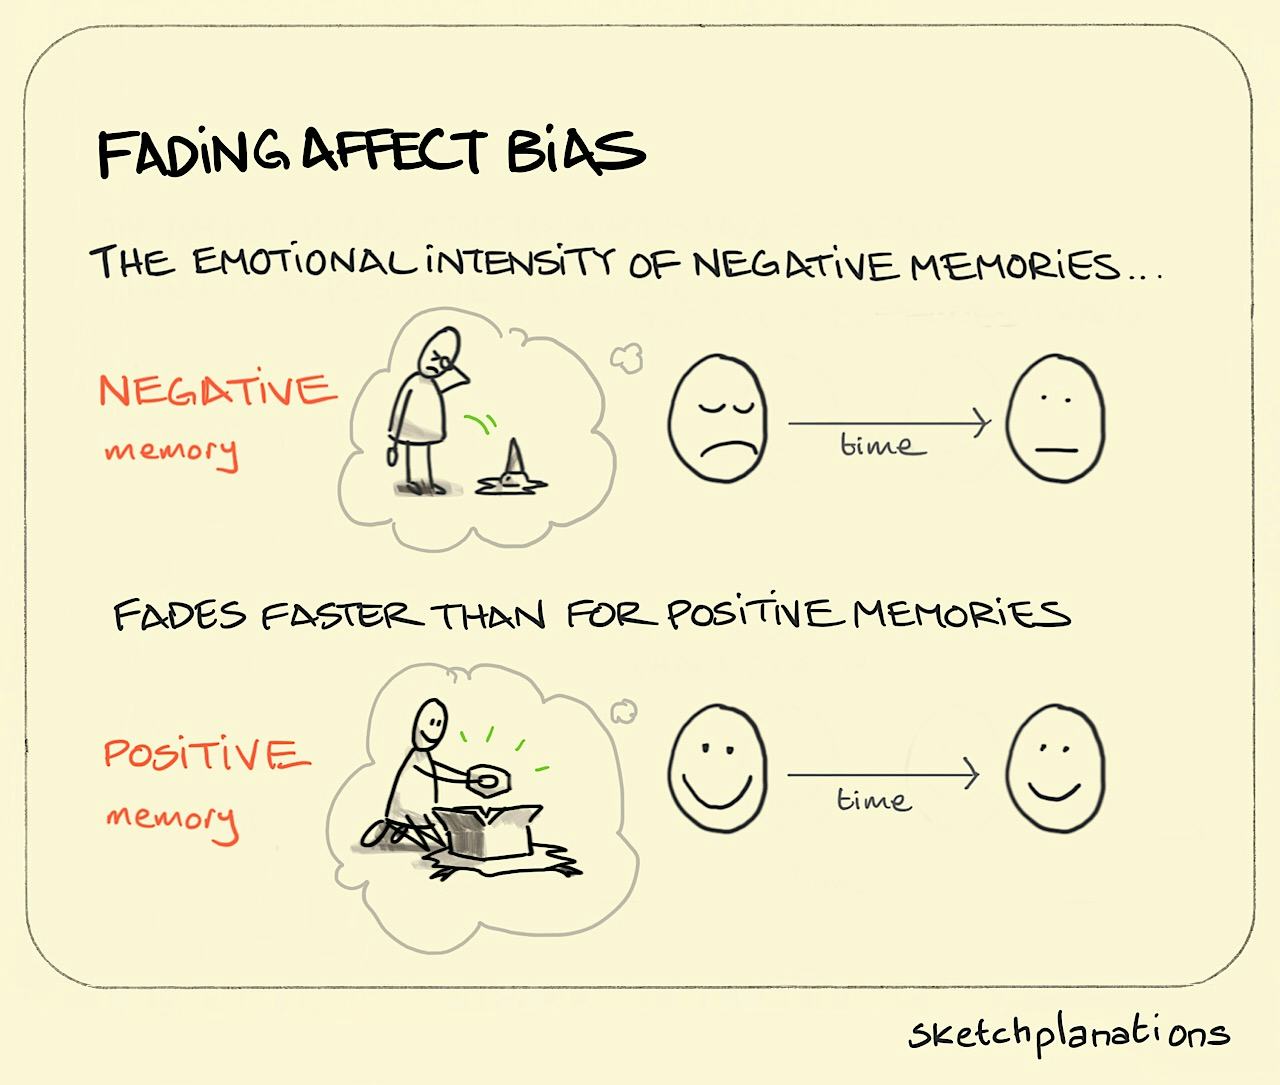 Fading affect bias illustration: showing that the emotional intensity of negative memories, like dropping your ice cream, fades faster than for positive memories